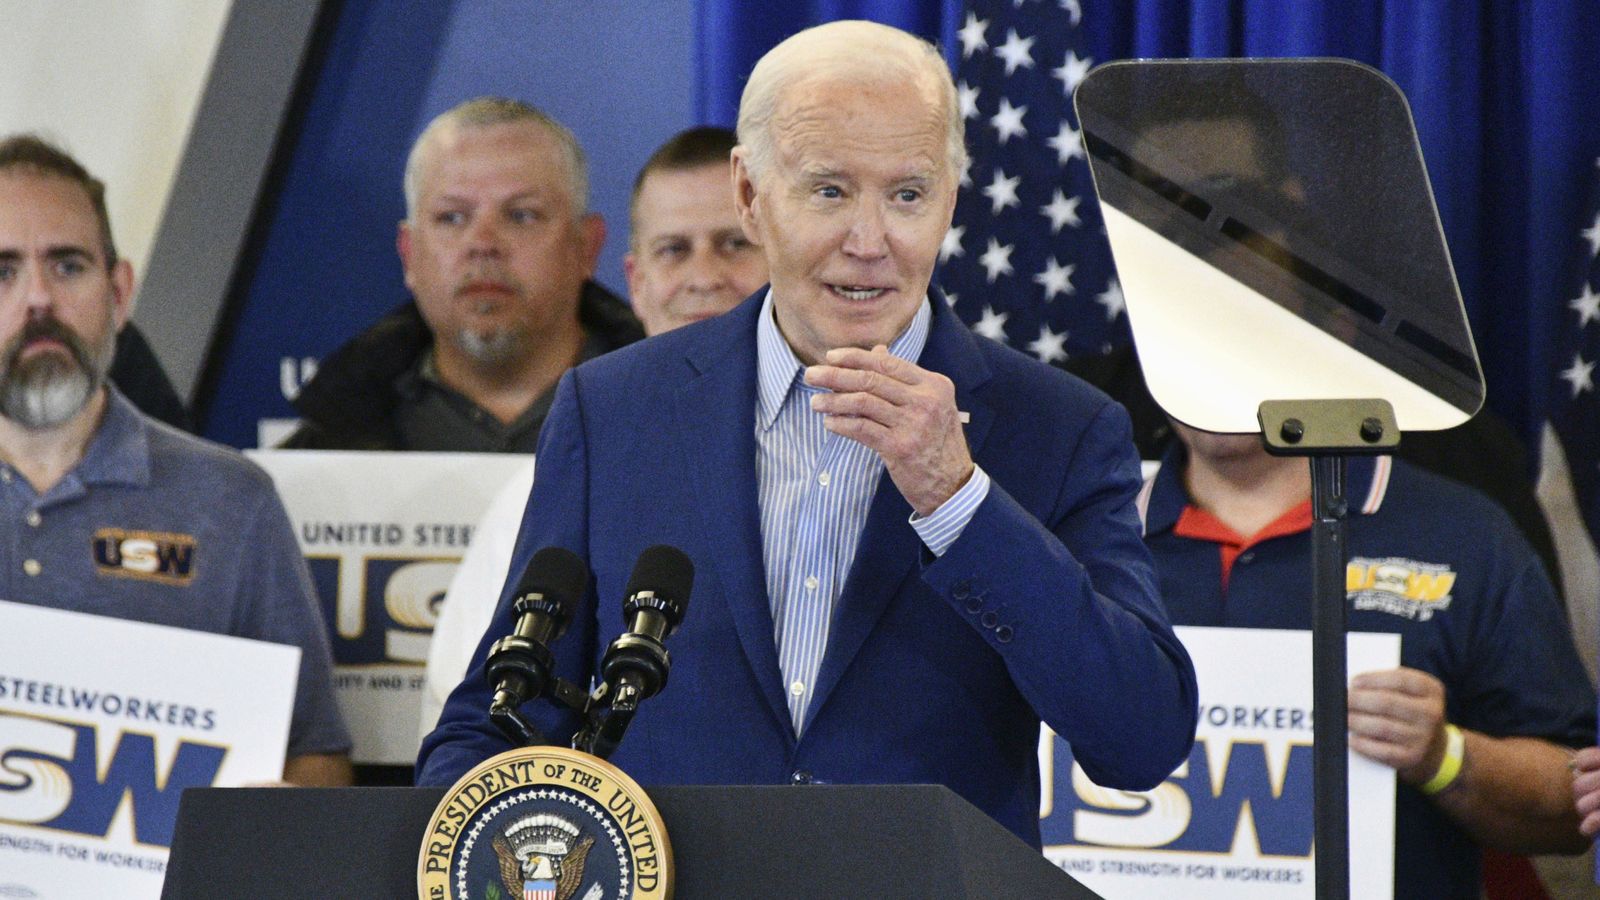 Biden suggests his uncle may have been eaten by cannibals during WWII - in apparent swipe at Trump